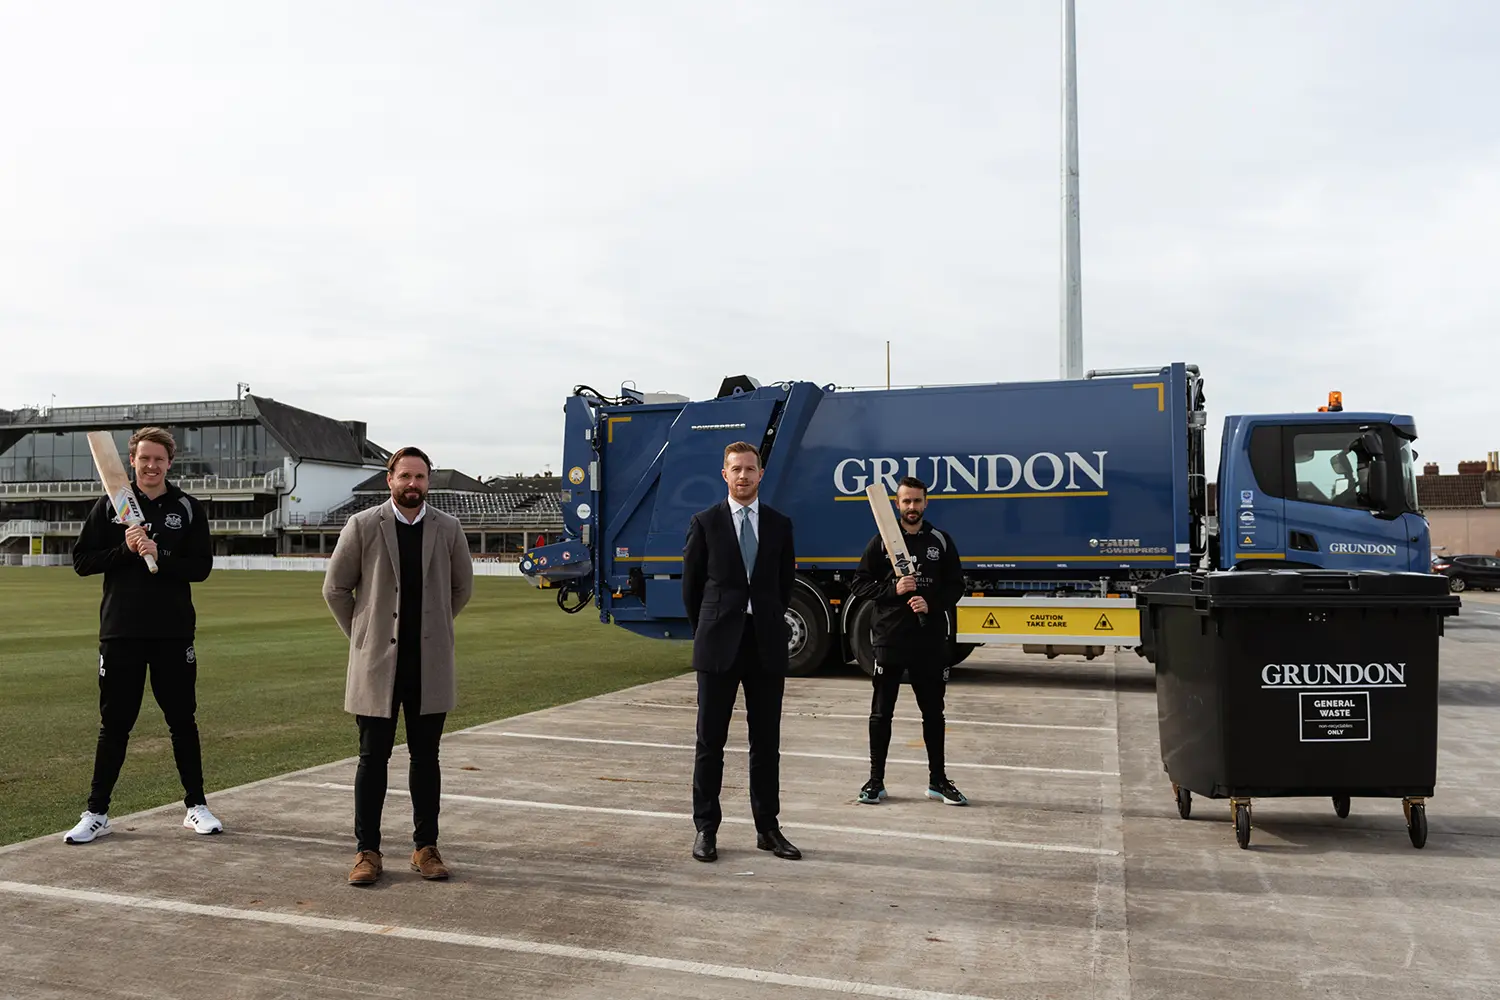 Celebrating the announcement of the new sustainability partnership: (from left to right) George Scott, all-rounder; Joe Kaniecki, business development manager at Gloucestershire Cricket Club; Steve Hill, head of sales for Grundon Waste Management; and Gloucestershire's T20 Captain and all-rounder, Jack Taylor.